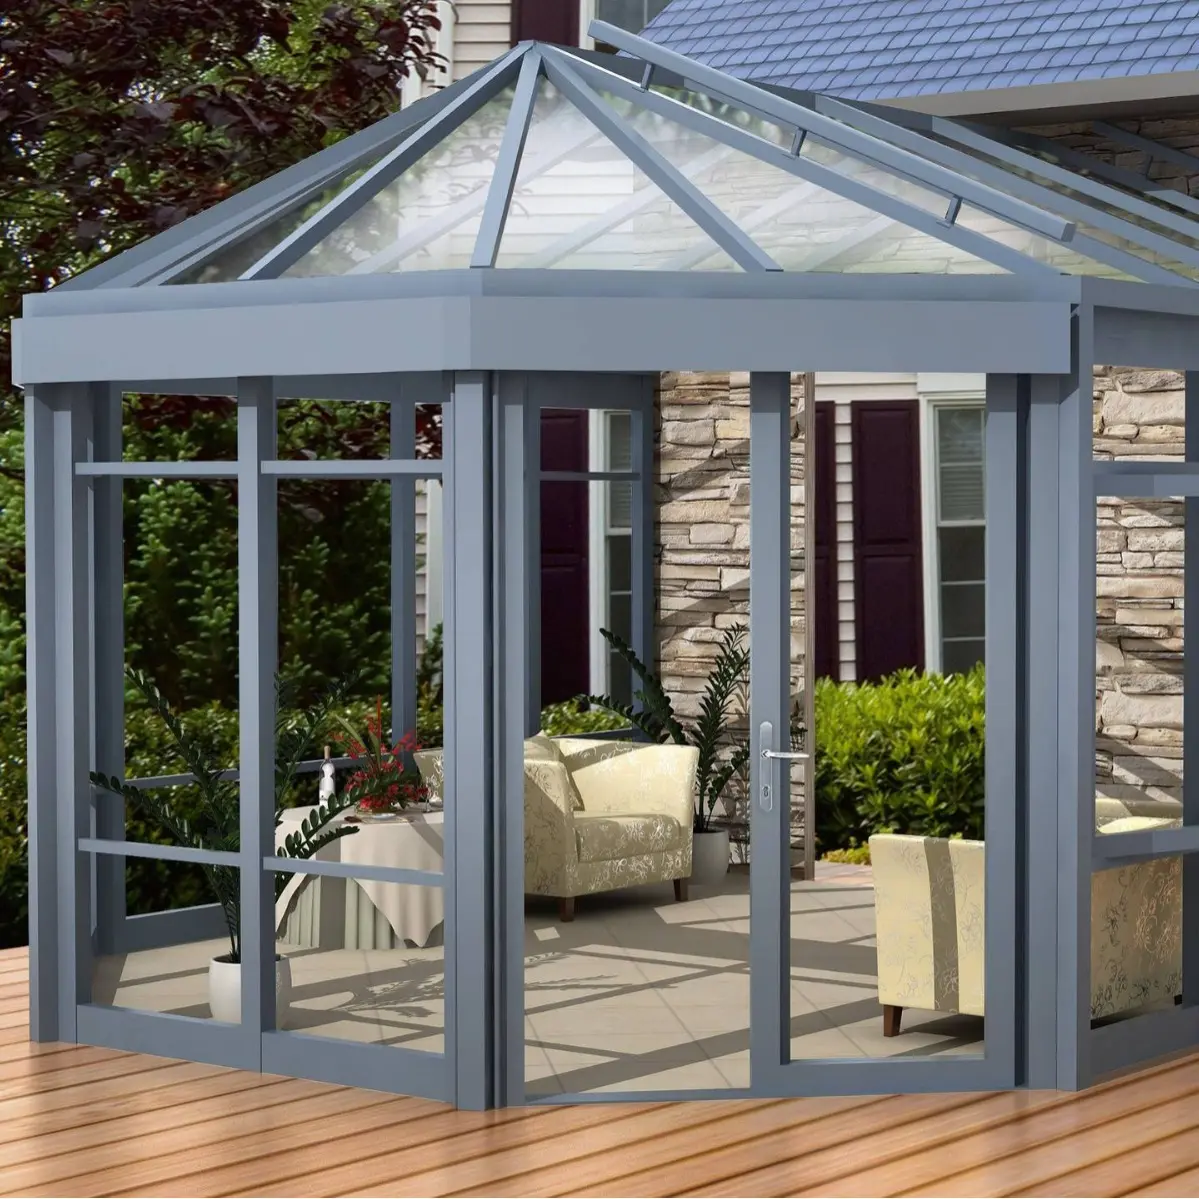 Sunrooms & glass houses slant roof aluminium detachable profile for outdoor sunroom in glass and screen